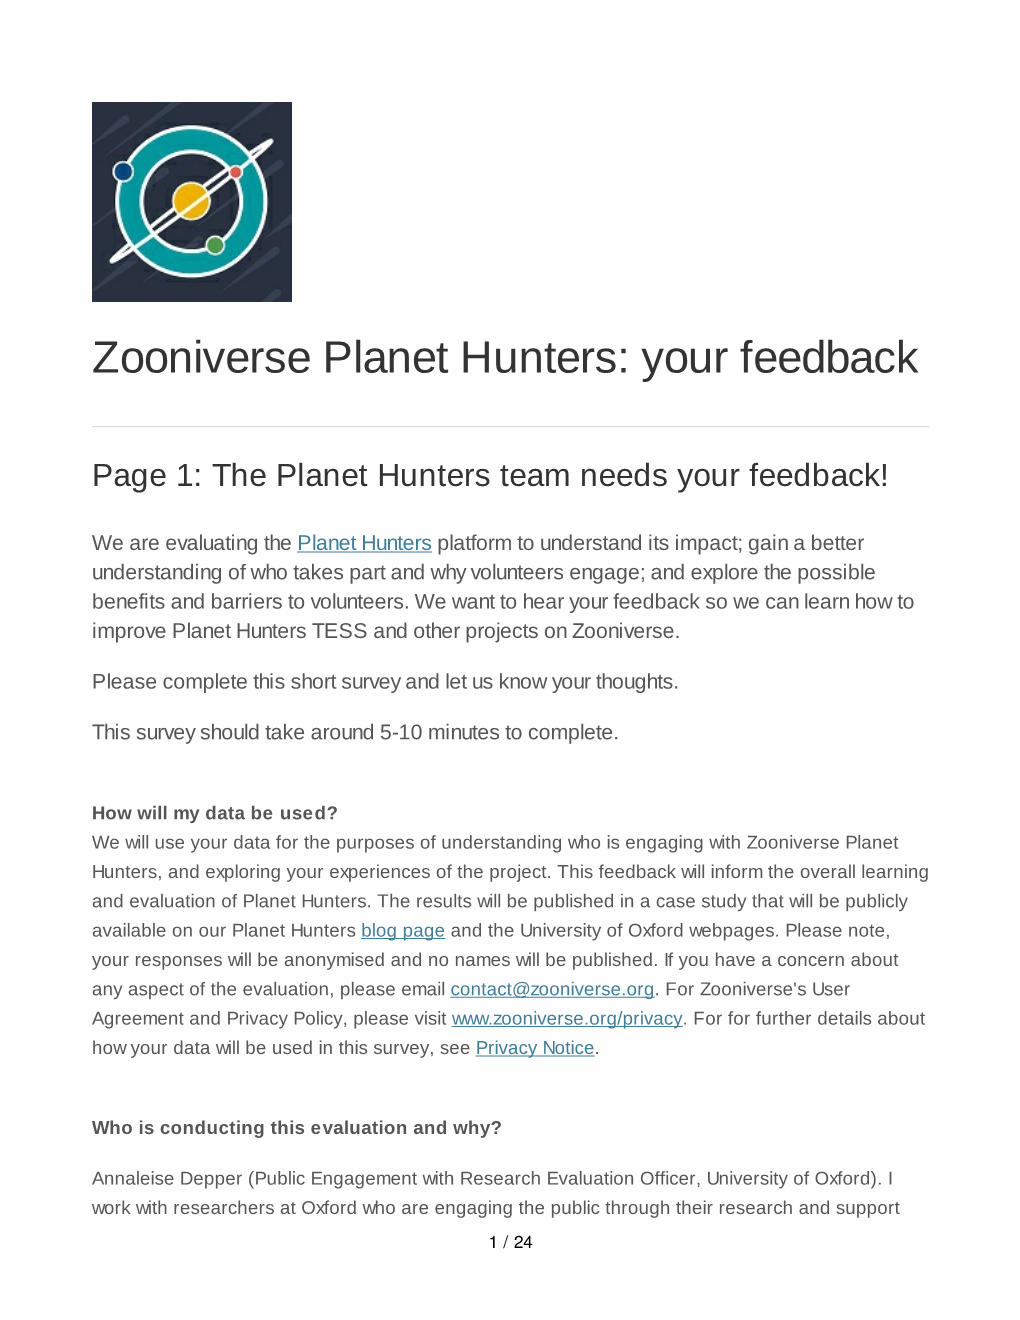 Zooniverse Planet Hunters: Your Feedback